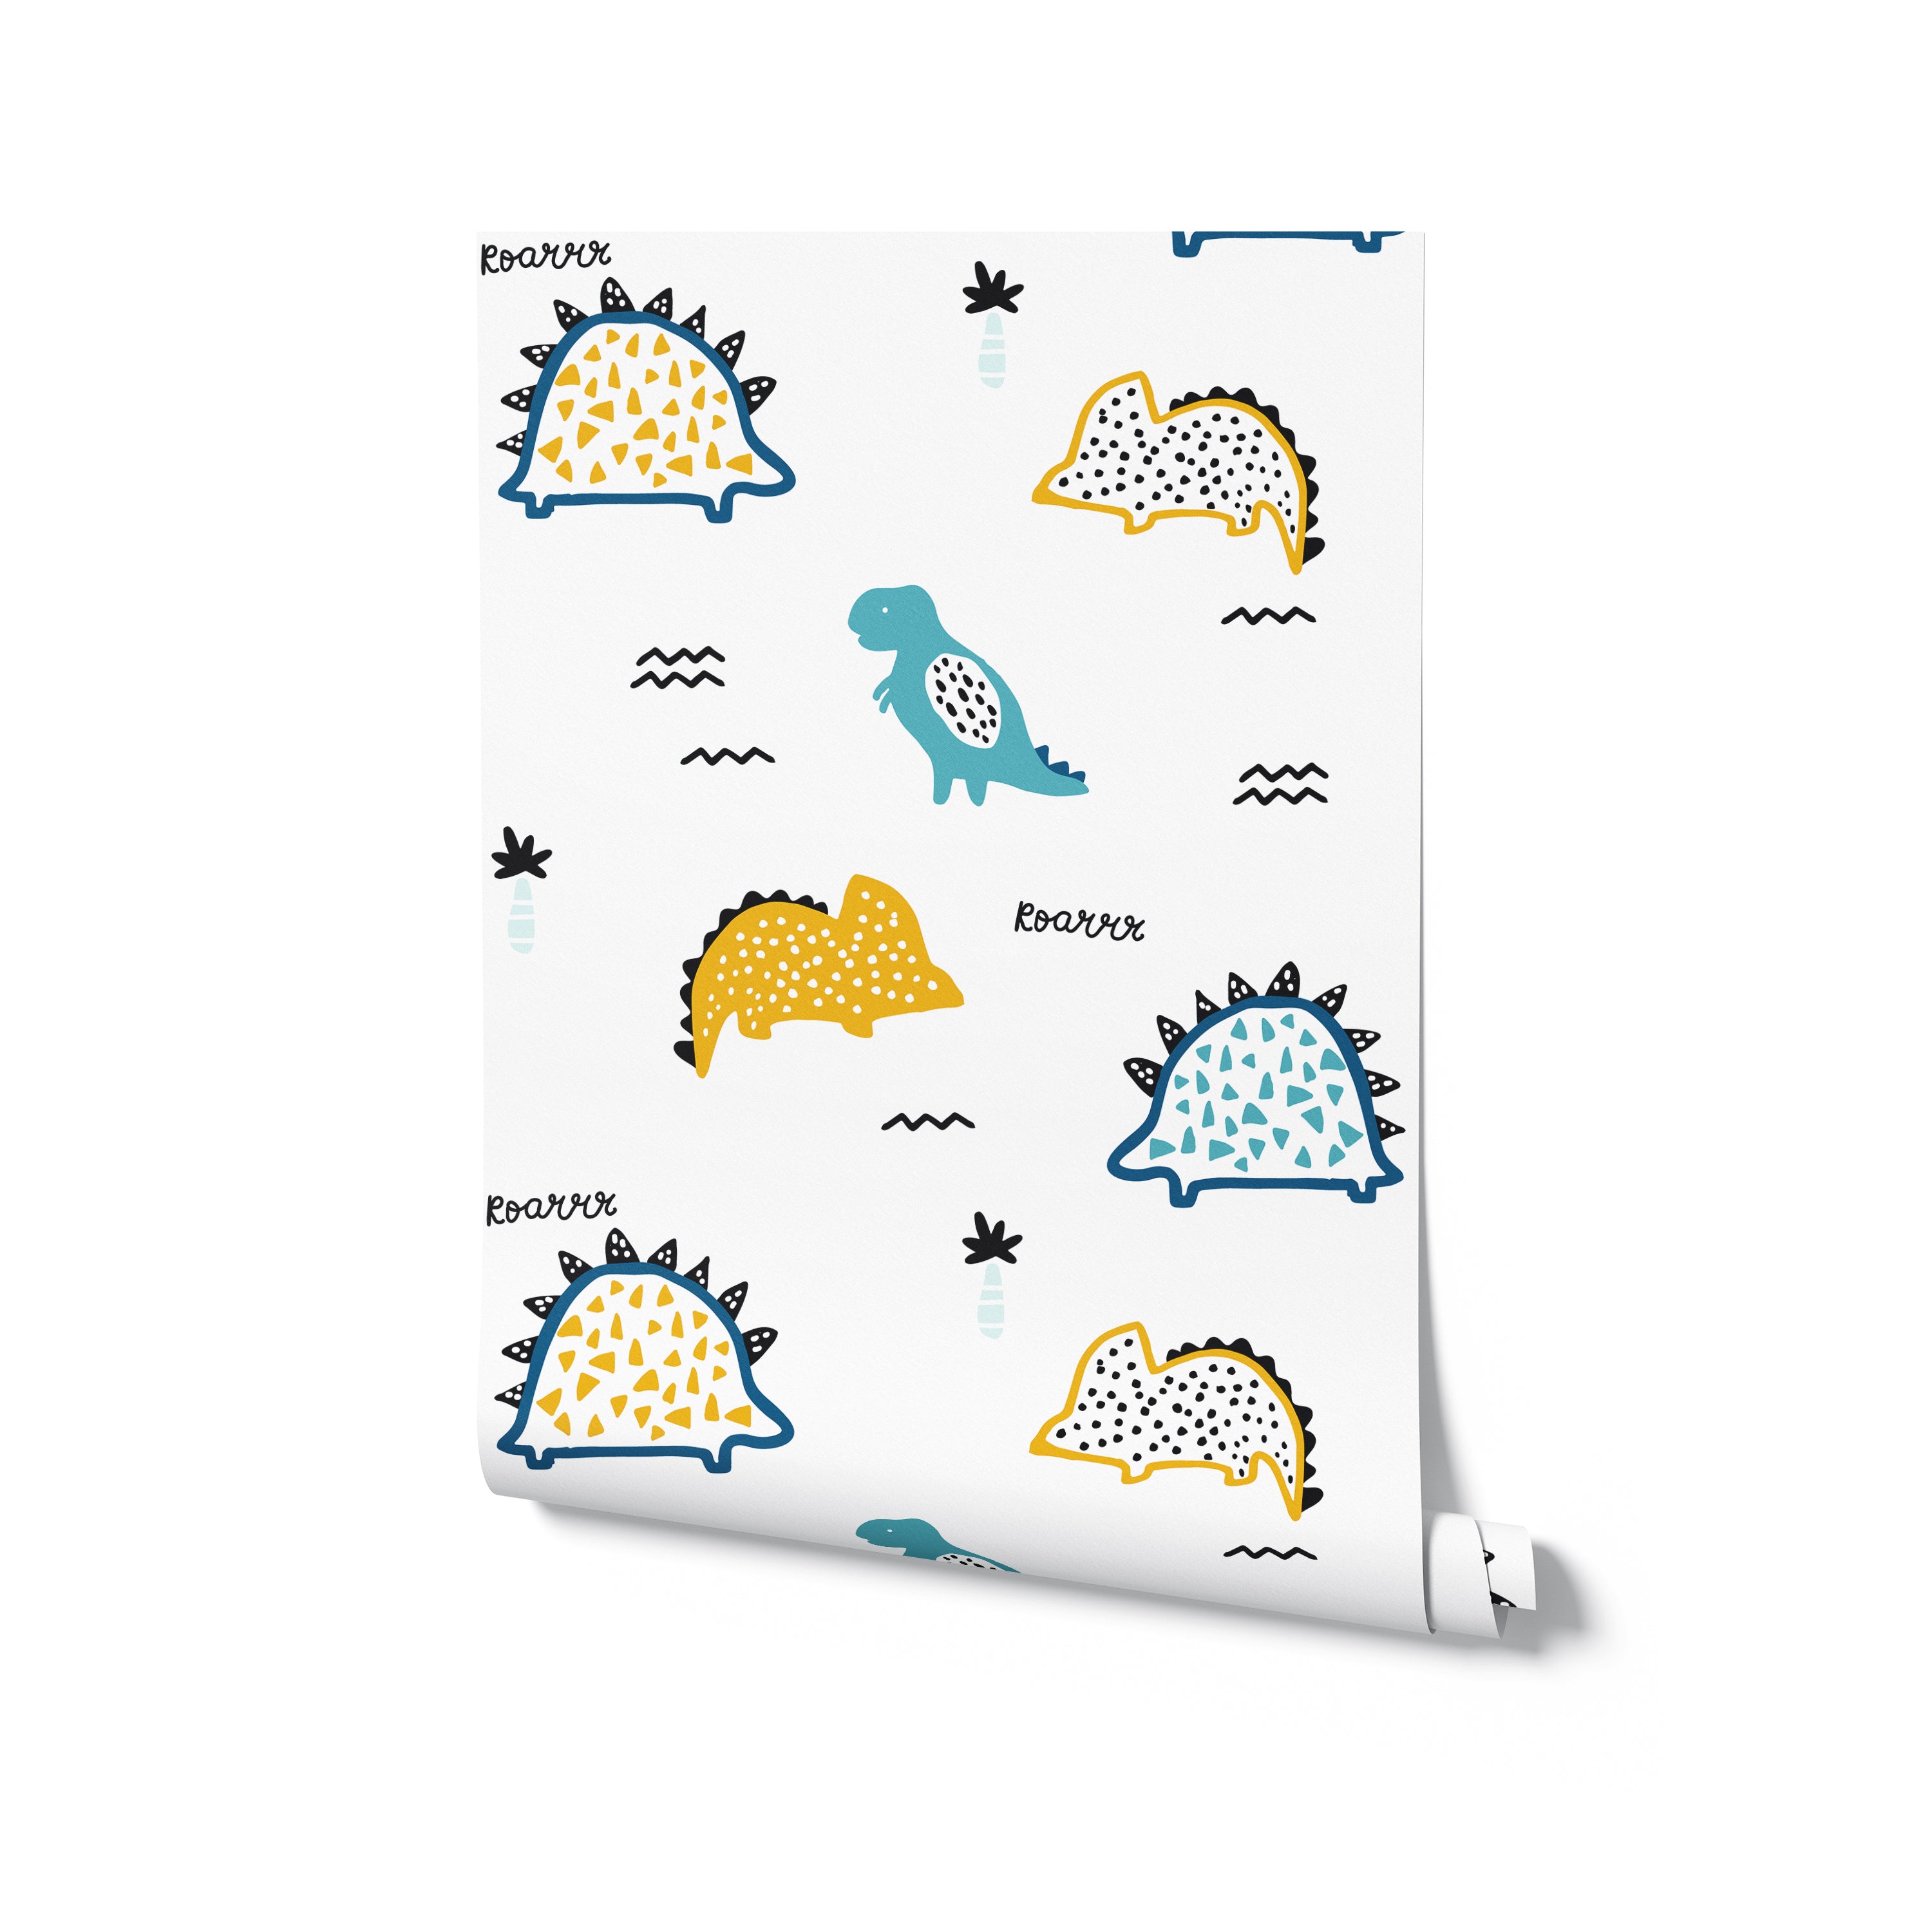 A roll of the Kids Wallpaper - Dino Days showing the repeated pattern of whimsical dinosaurs and tropical elements. This image highlights the fun and dynamic design of the wallpaper, suitable for adding character and joy to any child's play area or bedroom.